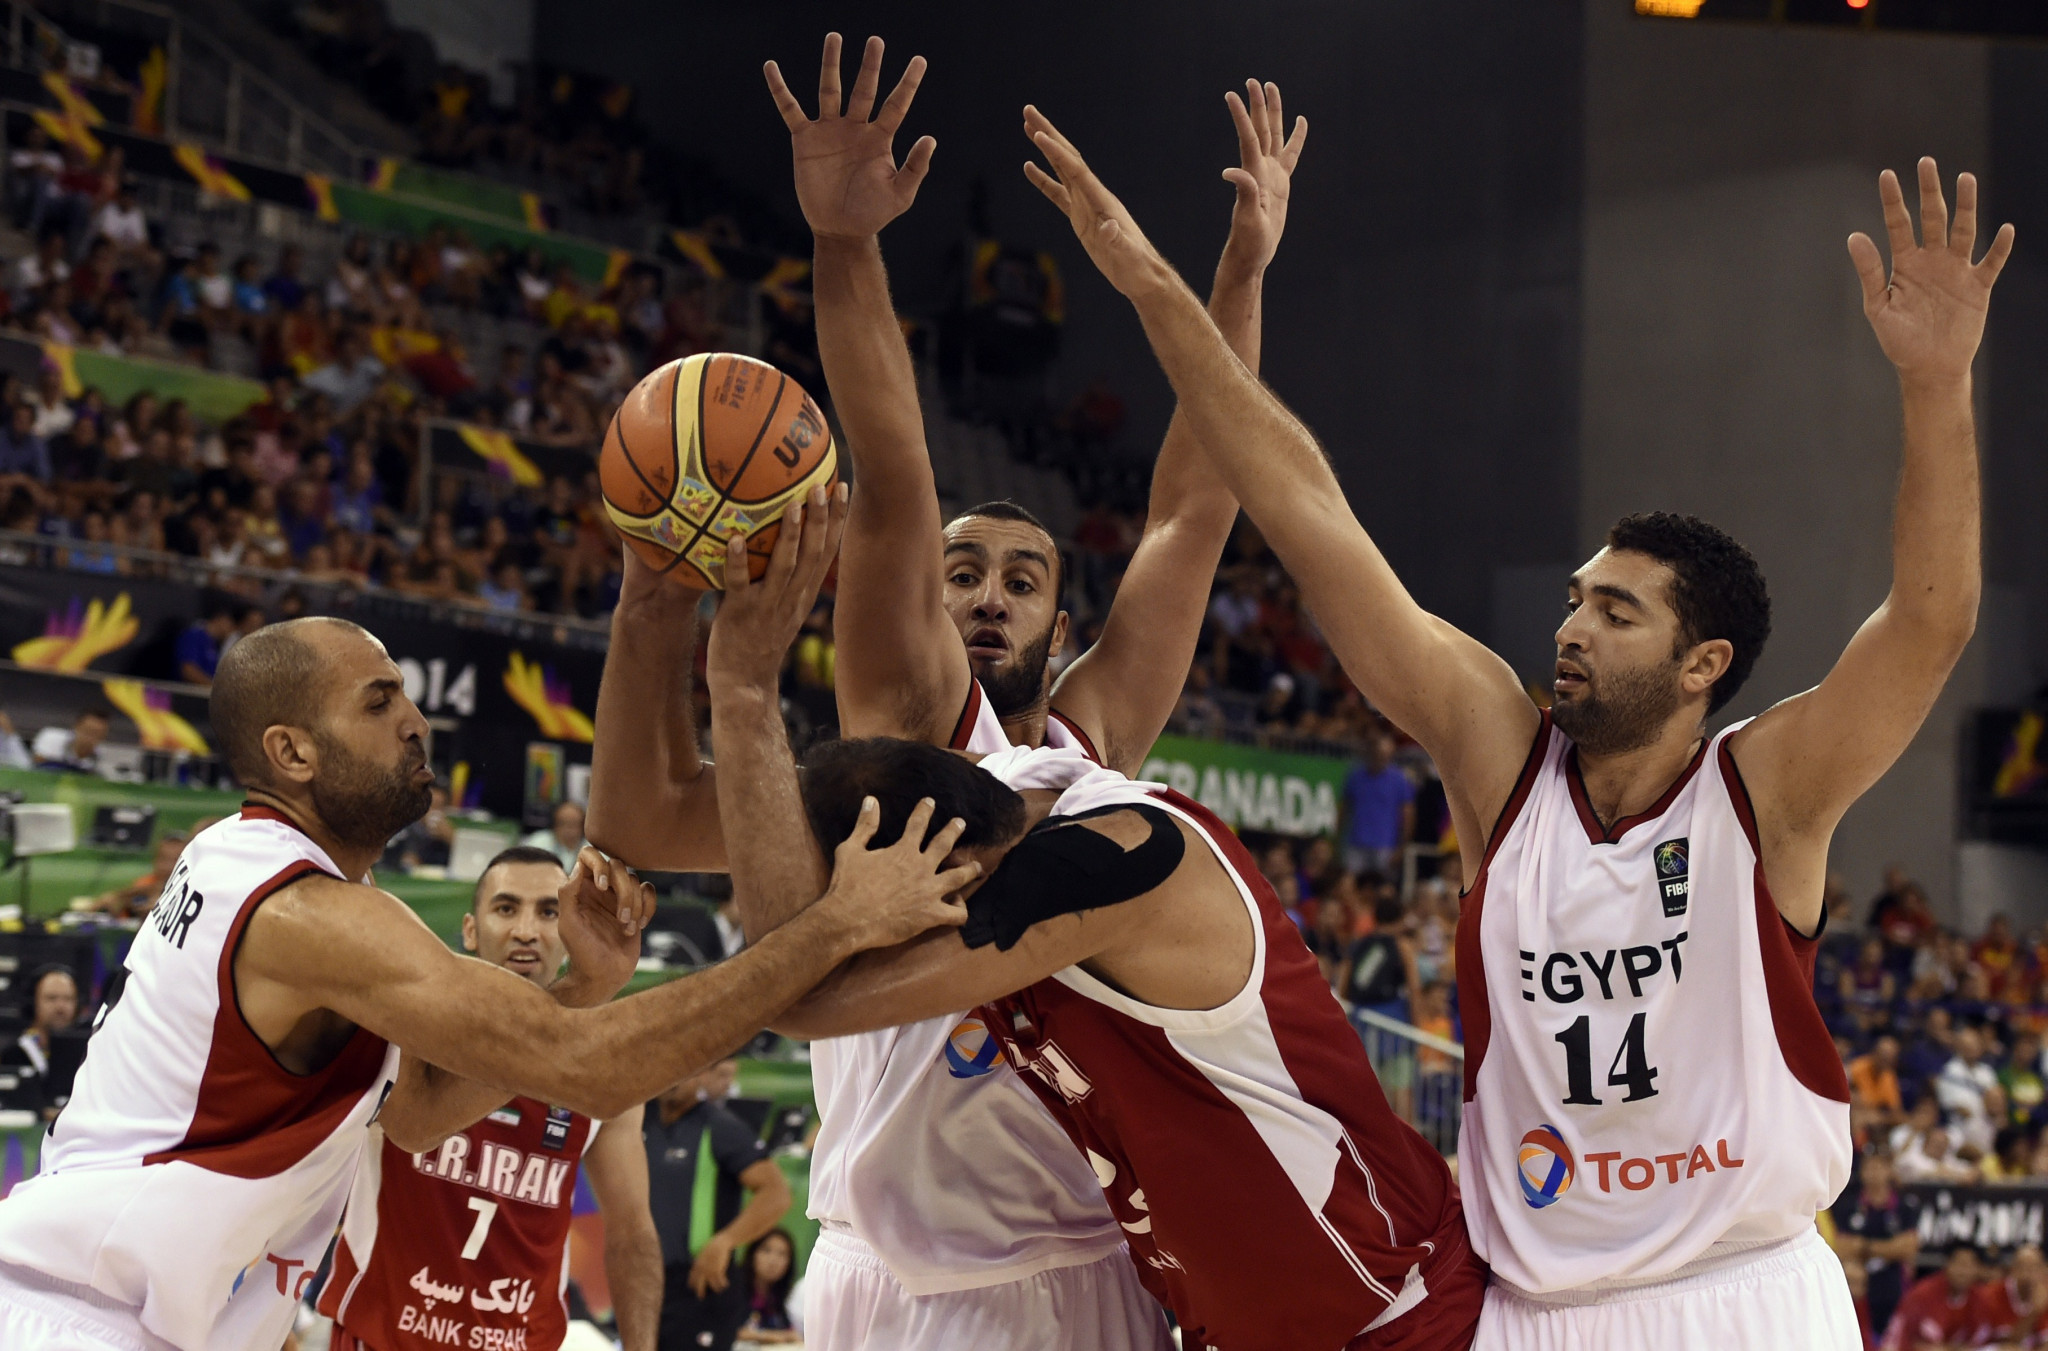 Top Egyptian players were set to be among those competing in the Basketball Africa League for 2020 ©Getty Images